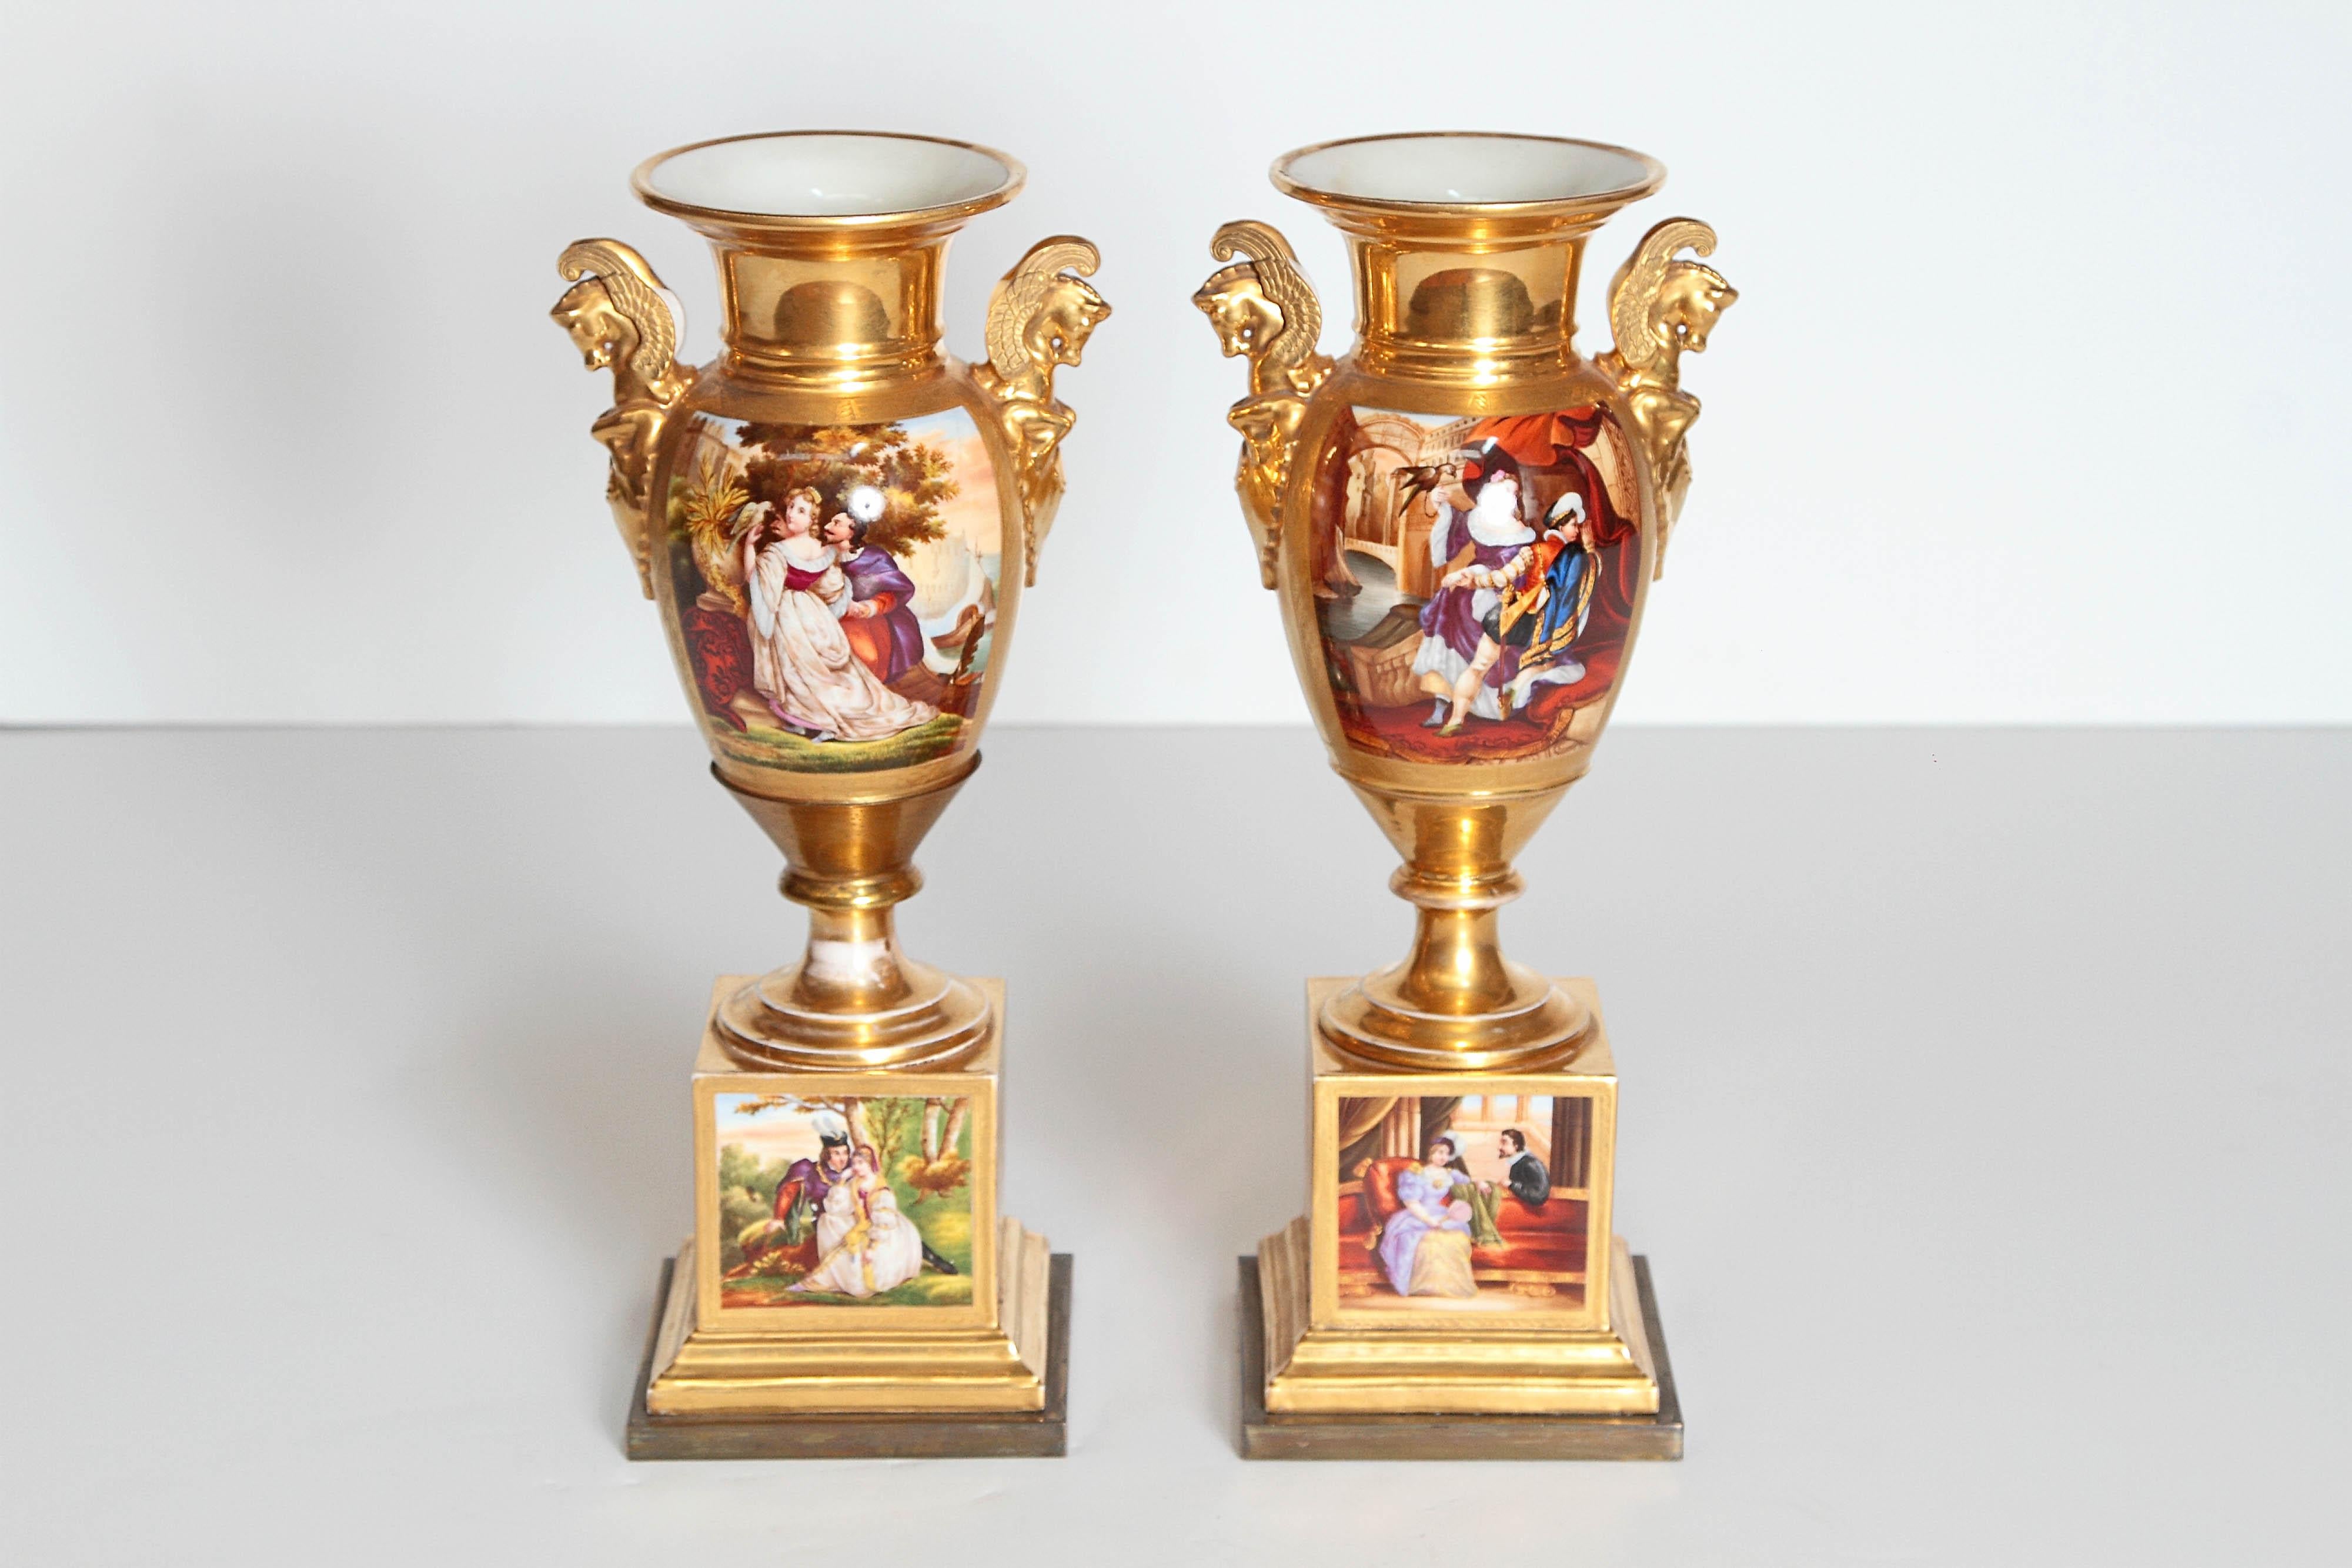 A pair of French porcelain urns, gilt overall with Pegasus busts on sides. Painted panels on side and base with painted scenes on square bases. 19th century, France.